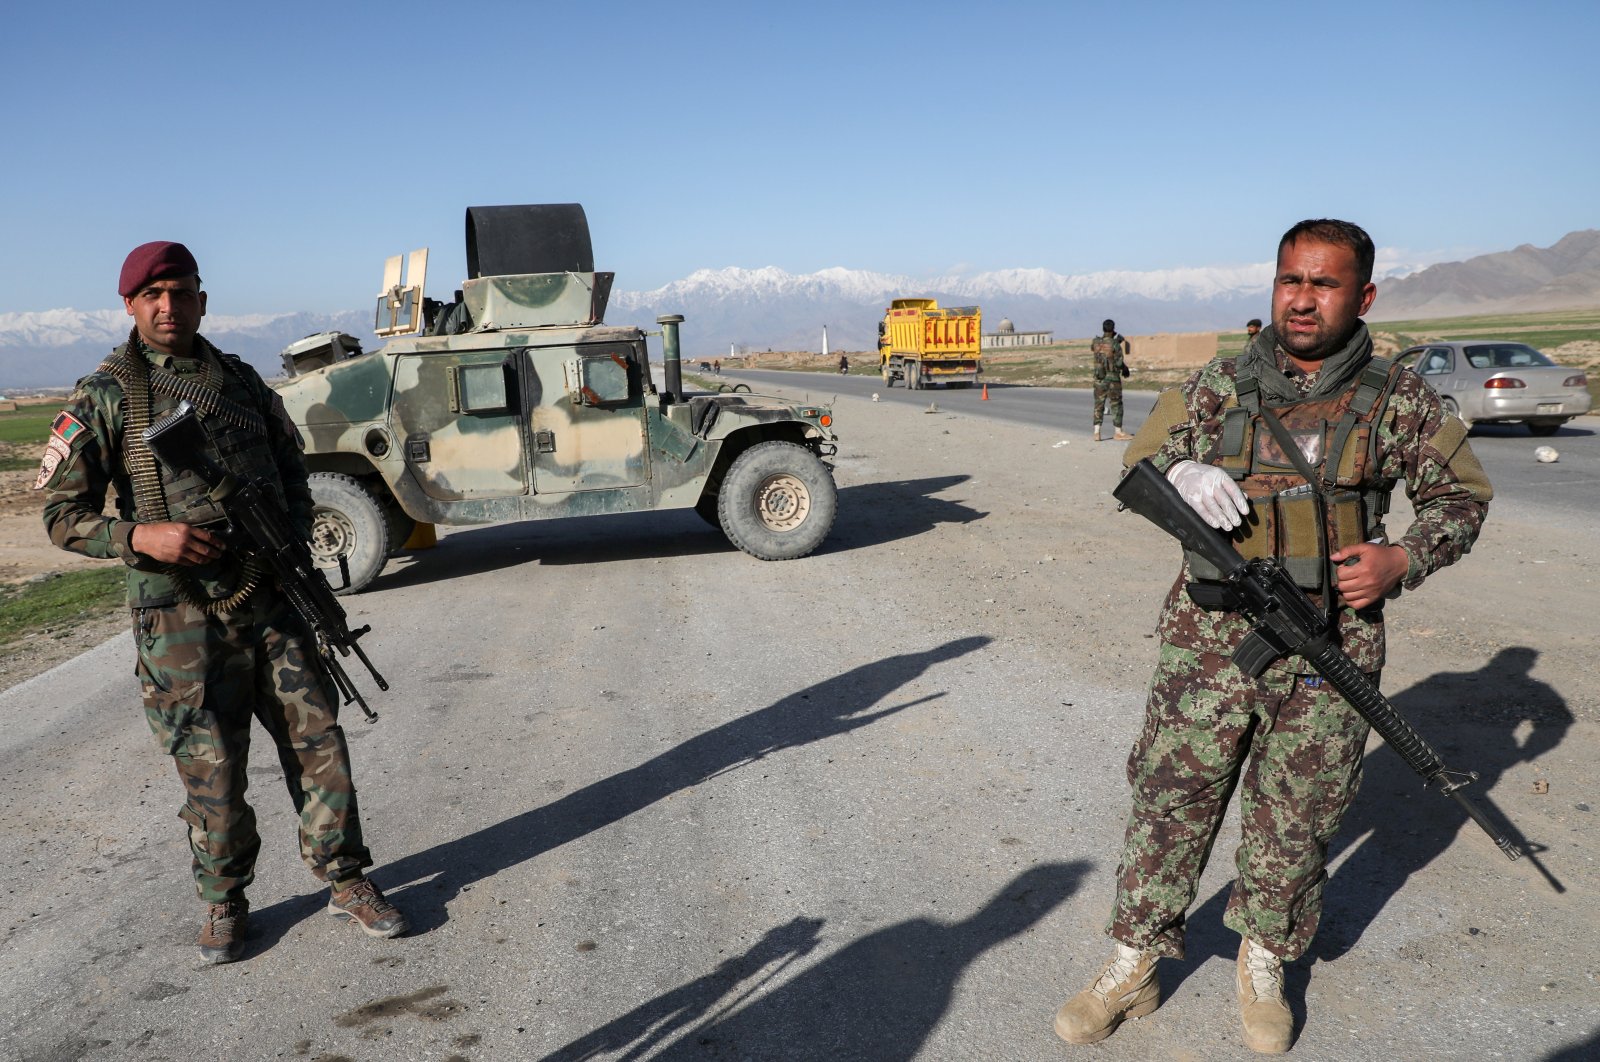 Afghan National Army (ANA) soldiers stand guard at a checkpoint near the Bagram Air Base north of Kabul, April 2, 2020. (REUTERS Photo)